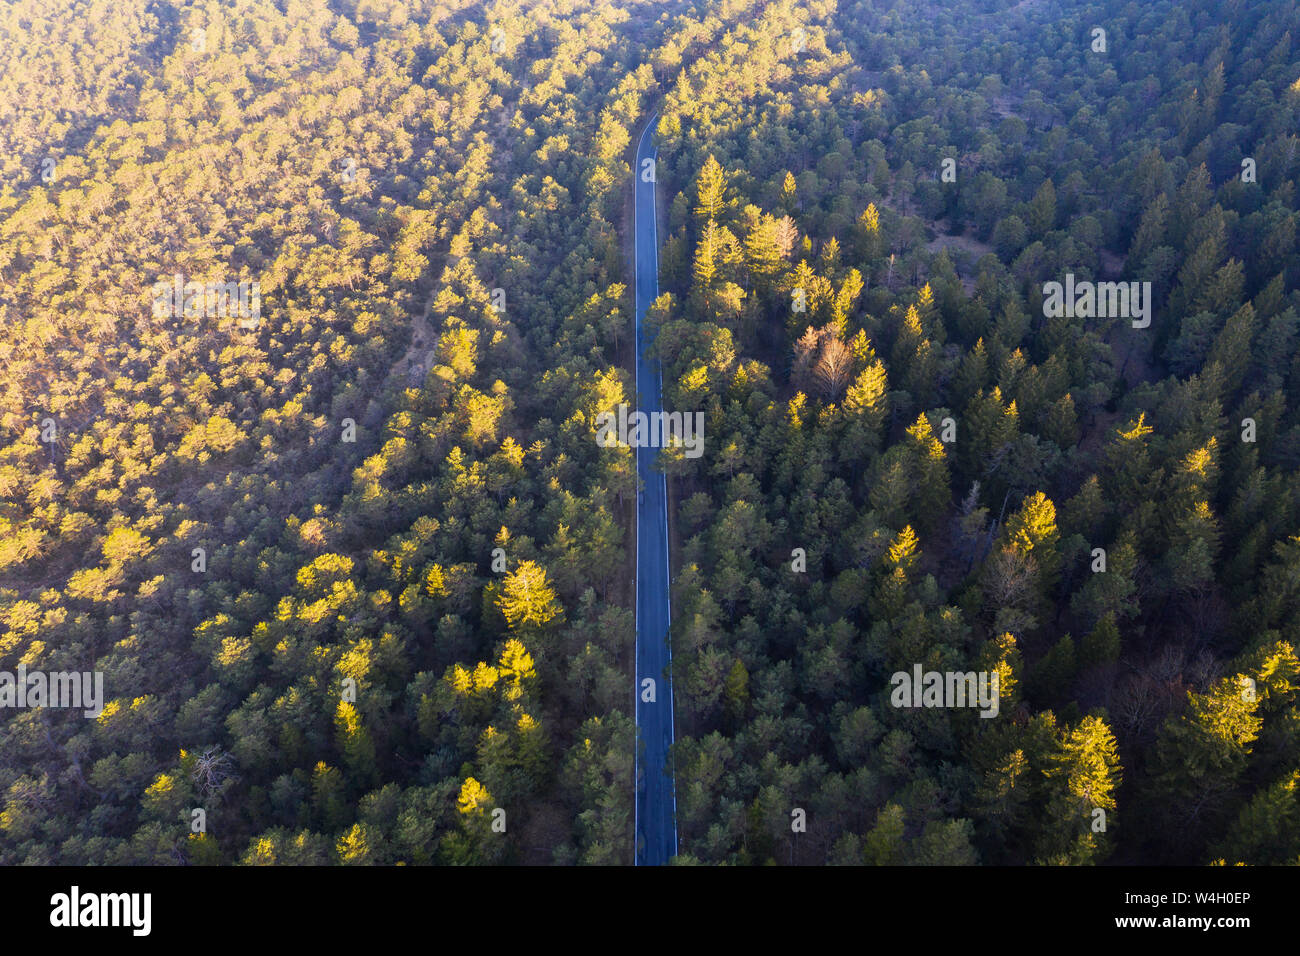 Country road in coniferous forest, Nature Reserve Isarauen, Upper Bavaria, Germany Stock Photo